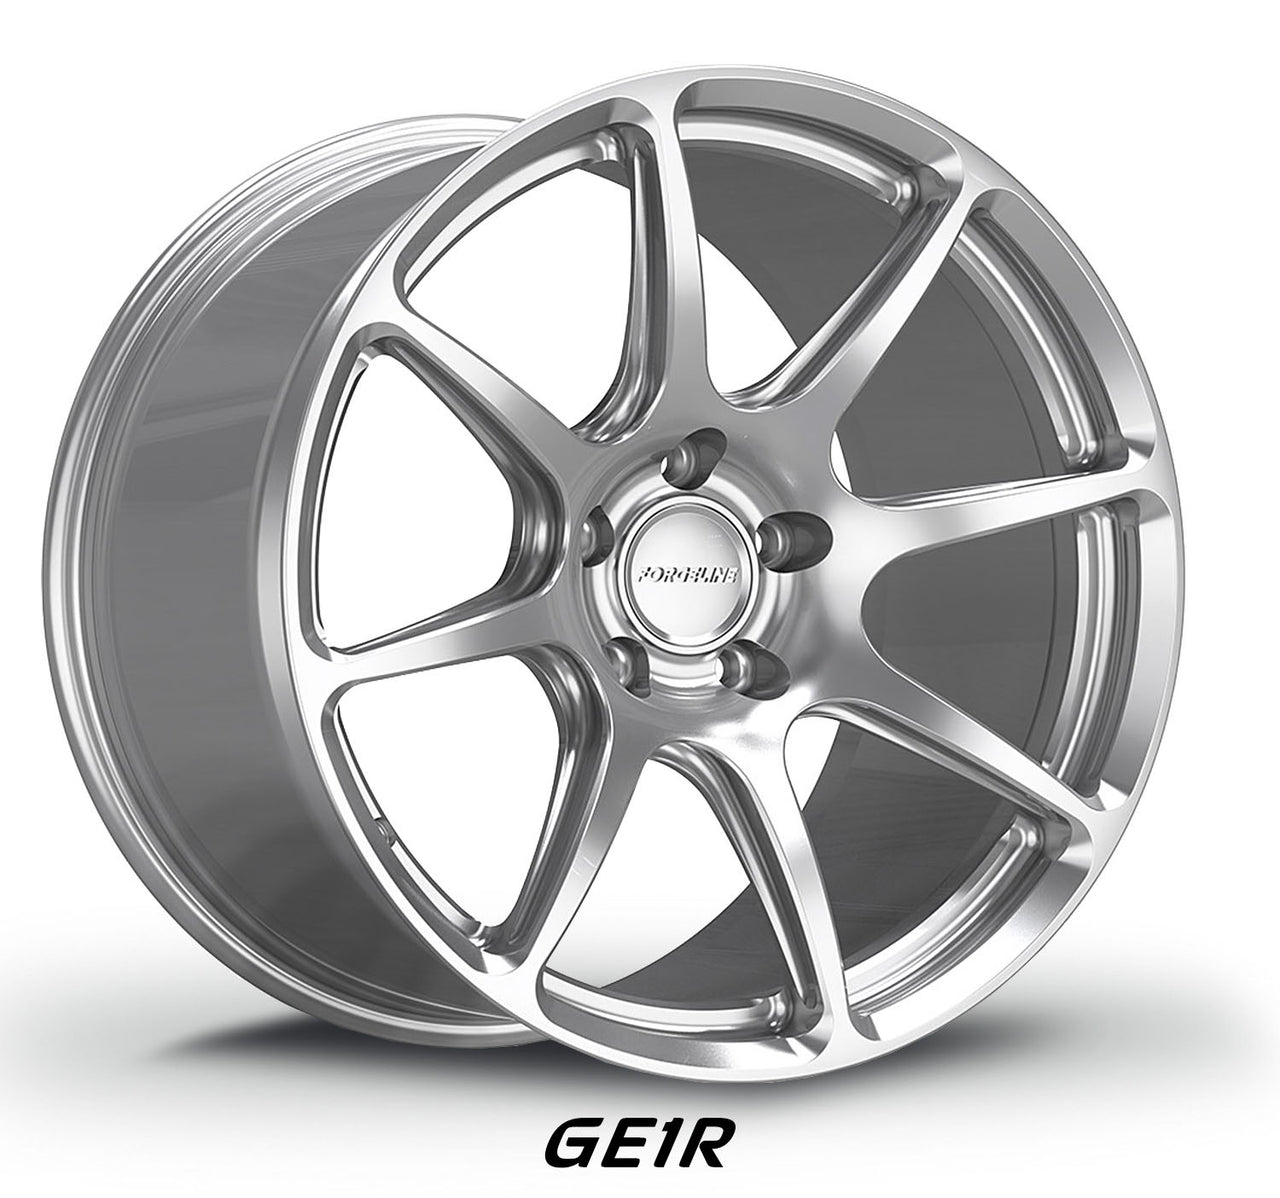 Hyper Silver finish Forgeline GE1R forged motorsports wheel for 981 Porsche Cayman GT4 the best for track days and HPDE events